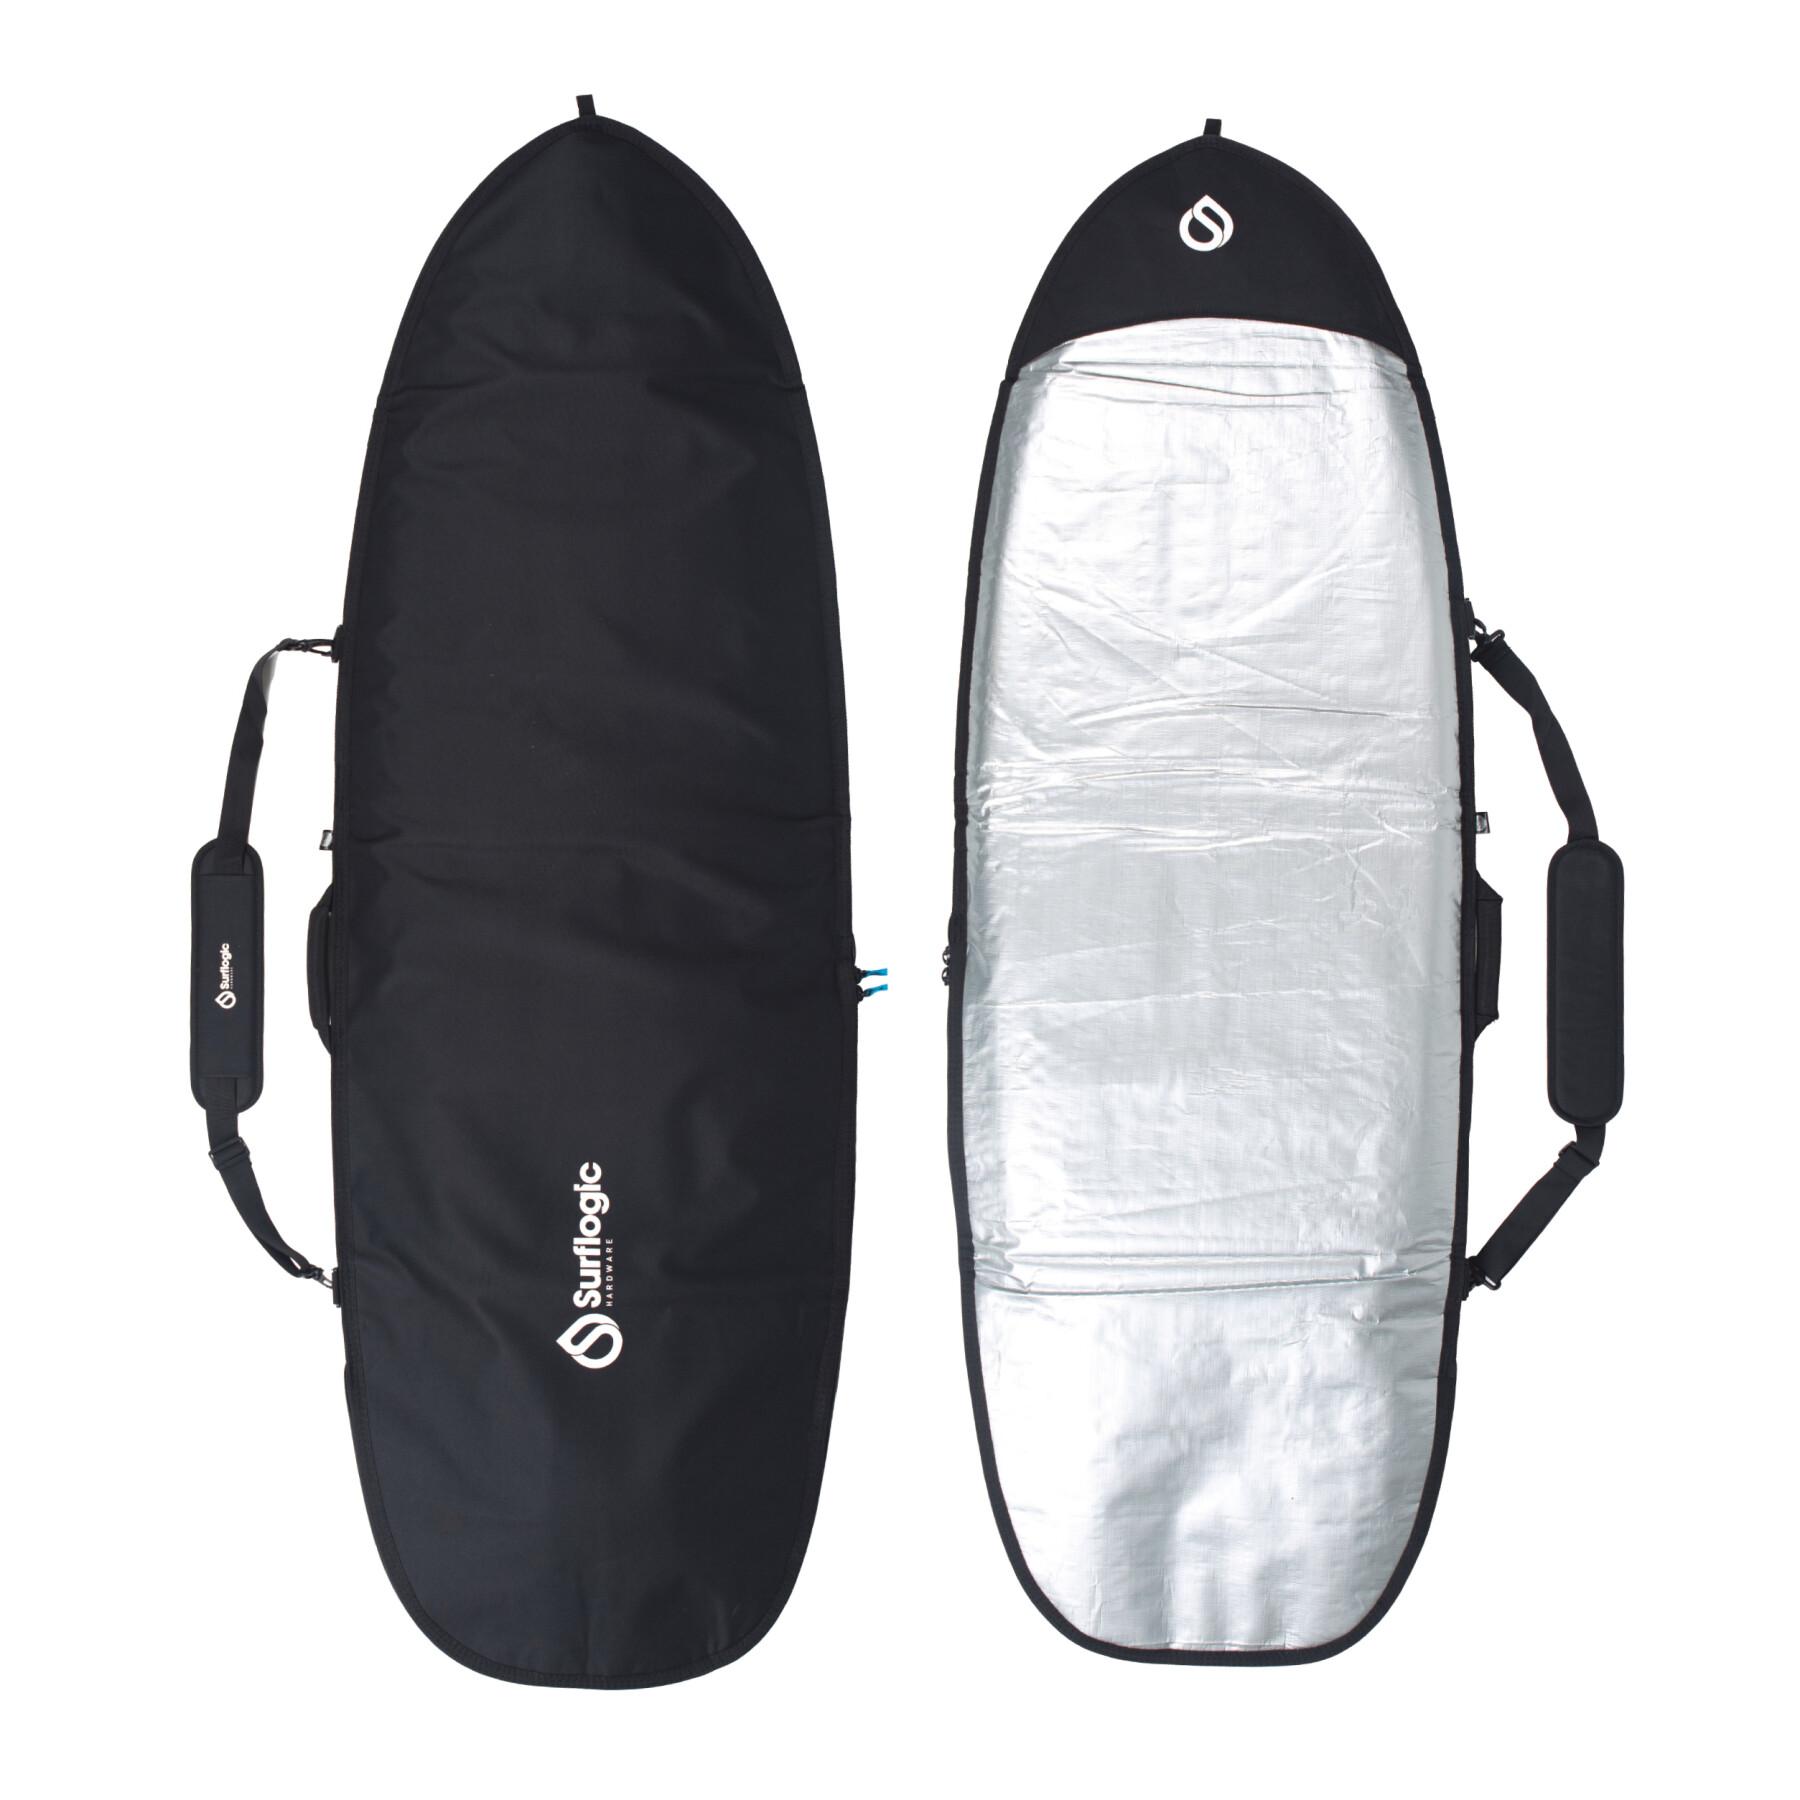 Board cover Surflogic Daylight Fish/hybrid cover 5'8"